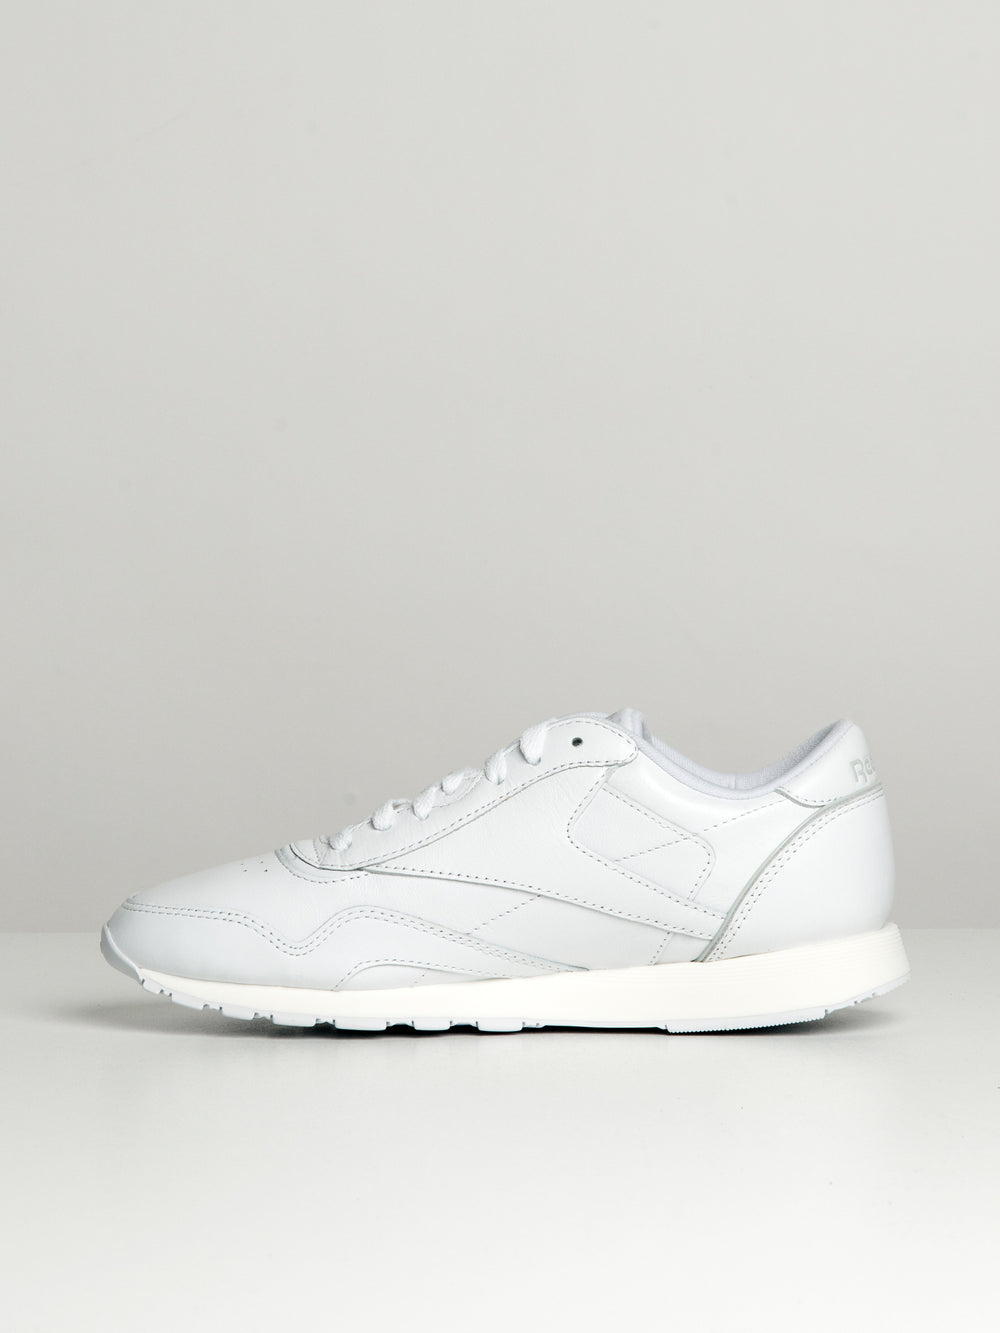 MENS REEBOK CLASSIC LEATHER PLUS - CLEARANCE